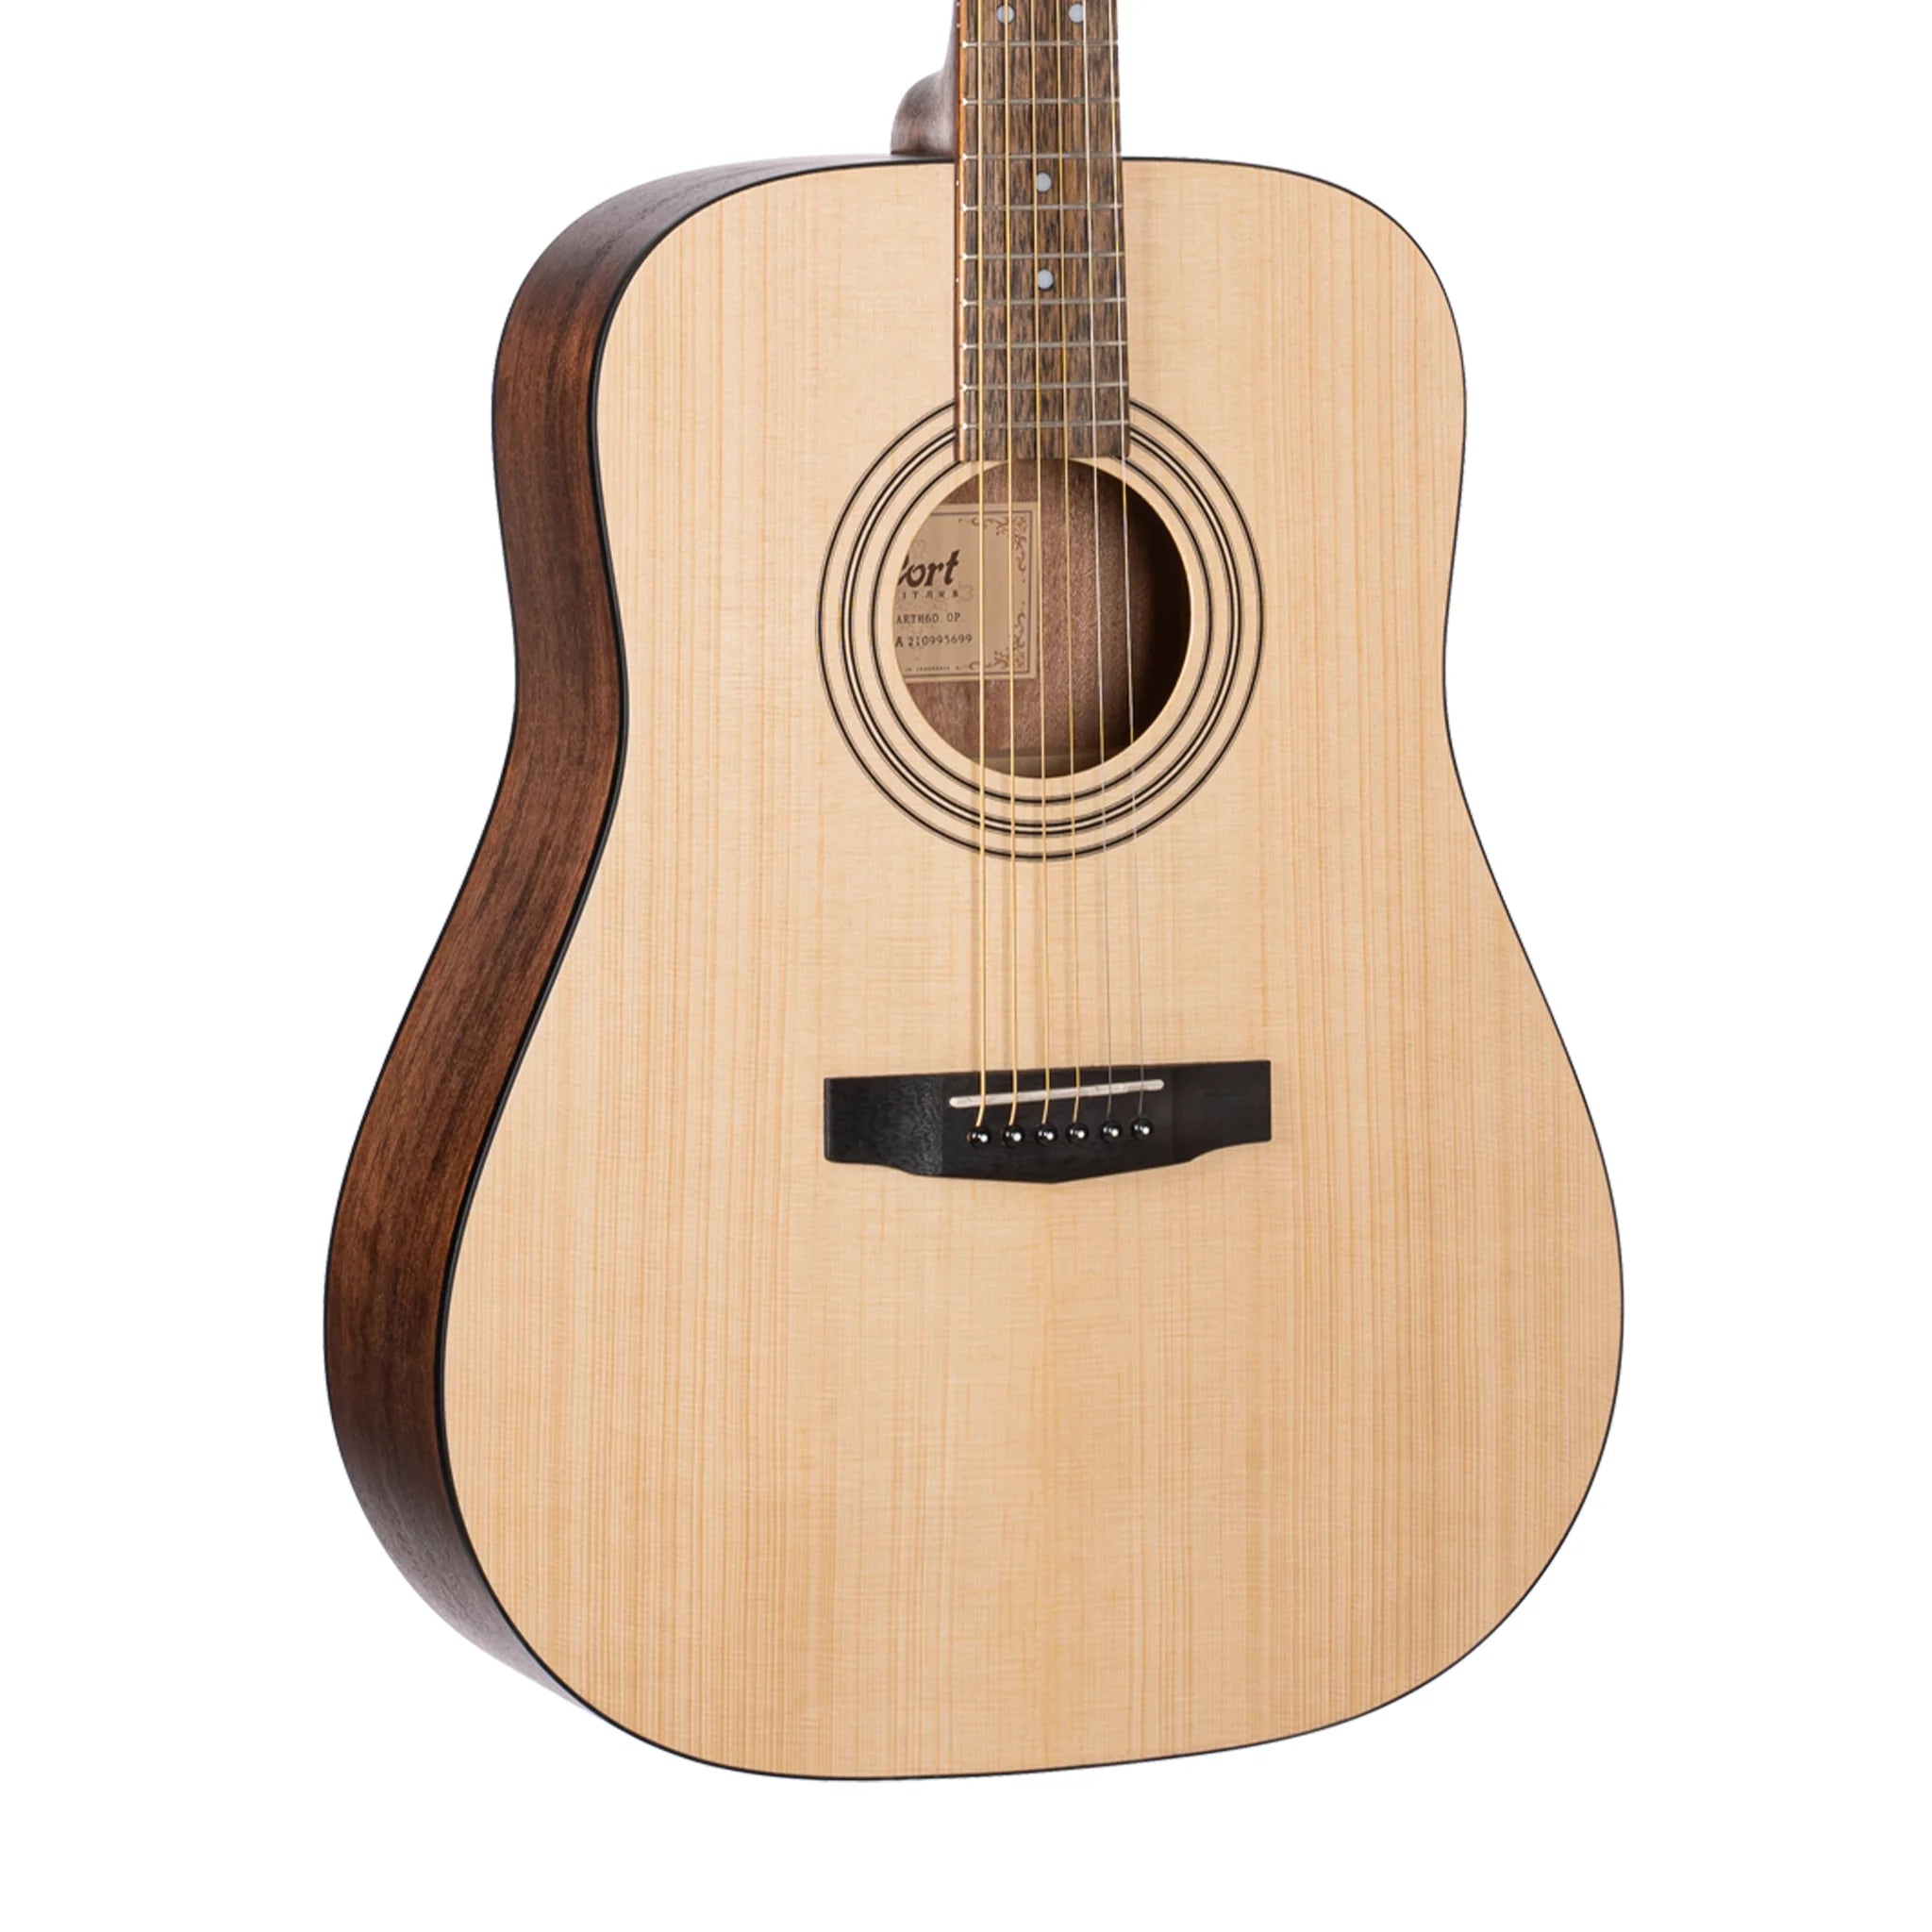 Solid Sitka Spruce Top / Mahogany Back ; Sides